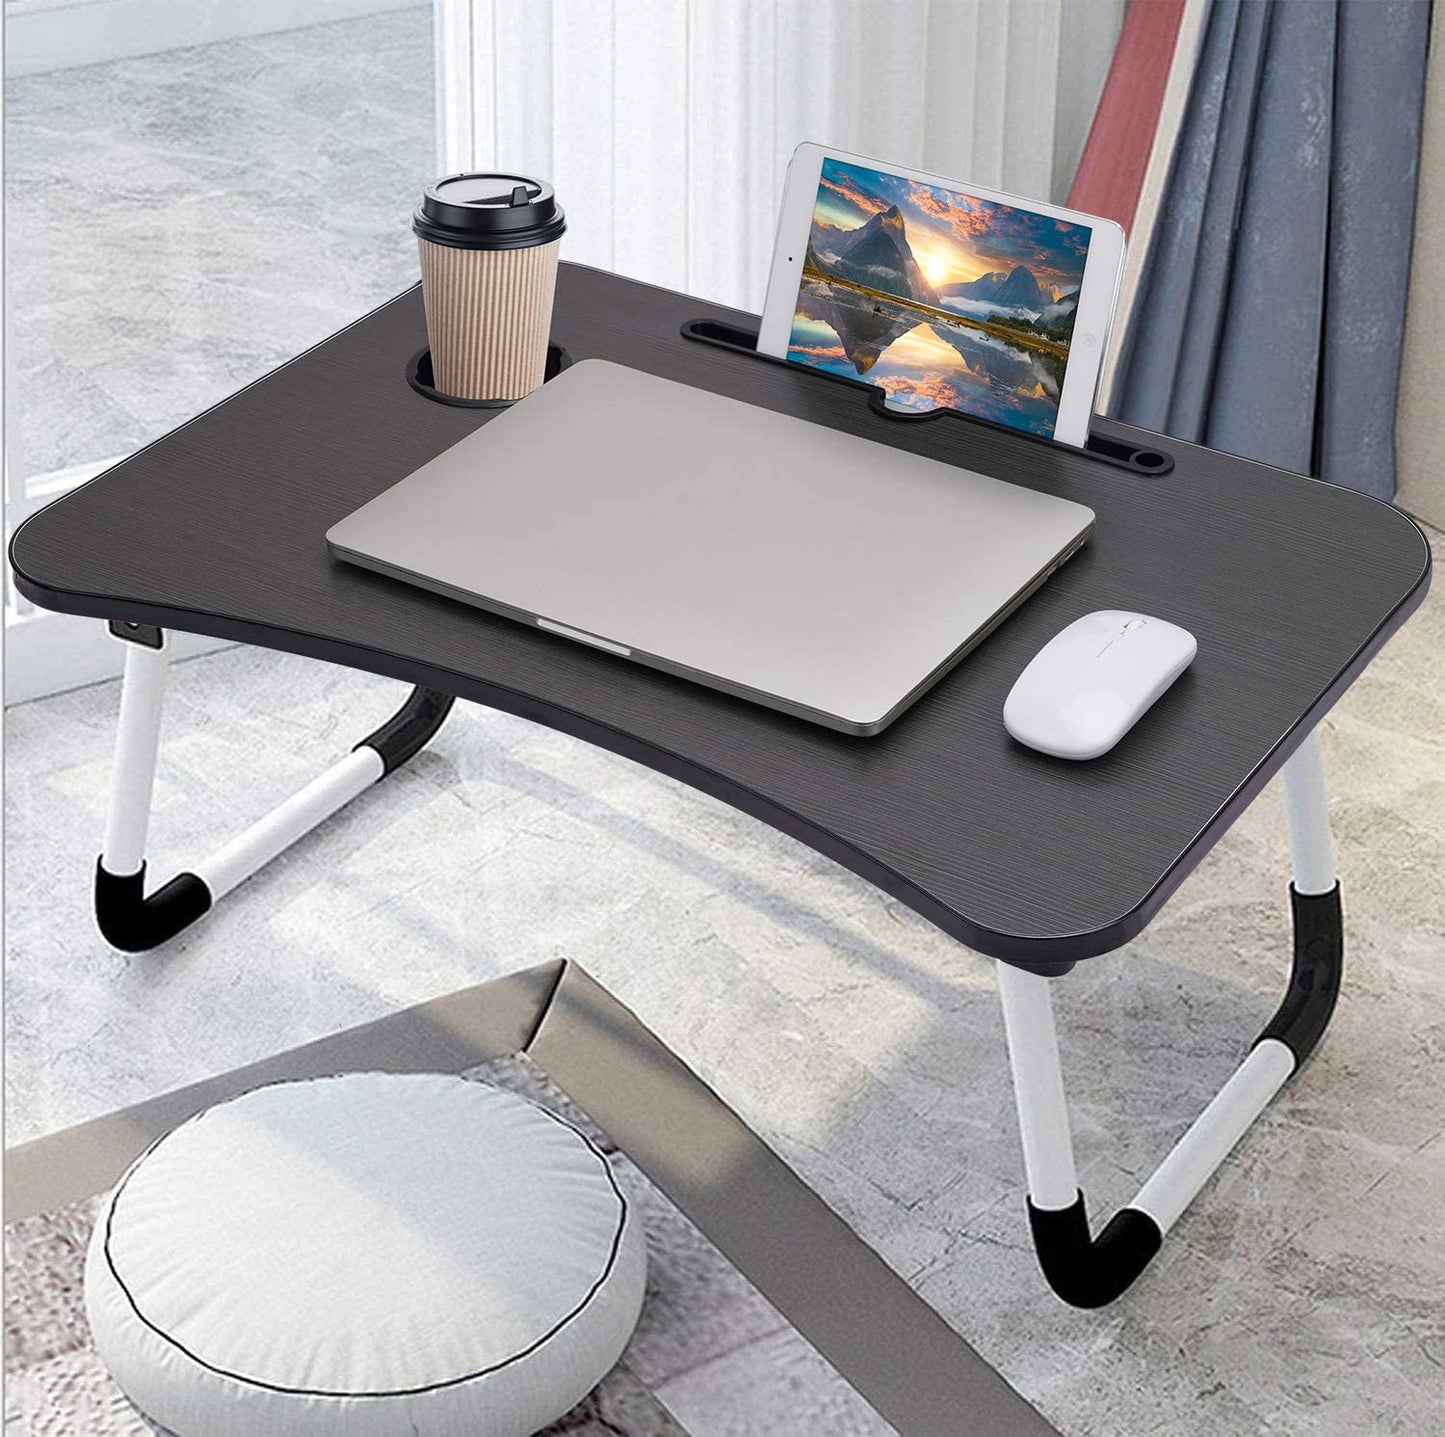 Wooden Multipurpose Laptop Table, Portable Study Bed Table, Breakfast Serving Bed Tray with Cup Holder & Mobile Tablet Holder (Black)